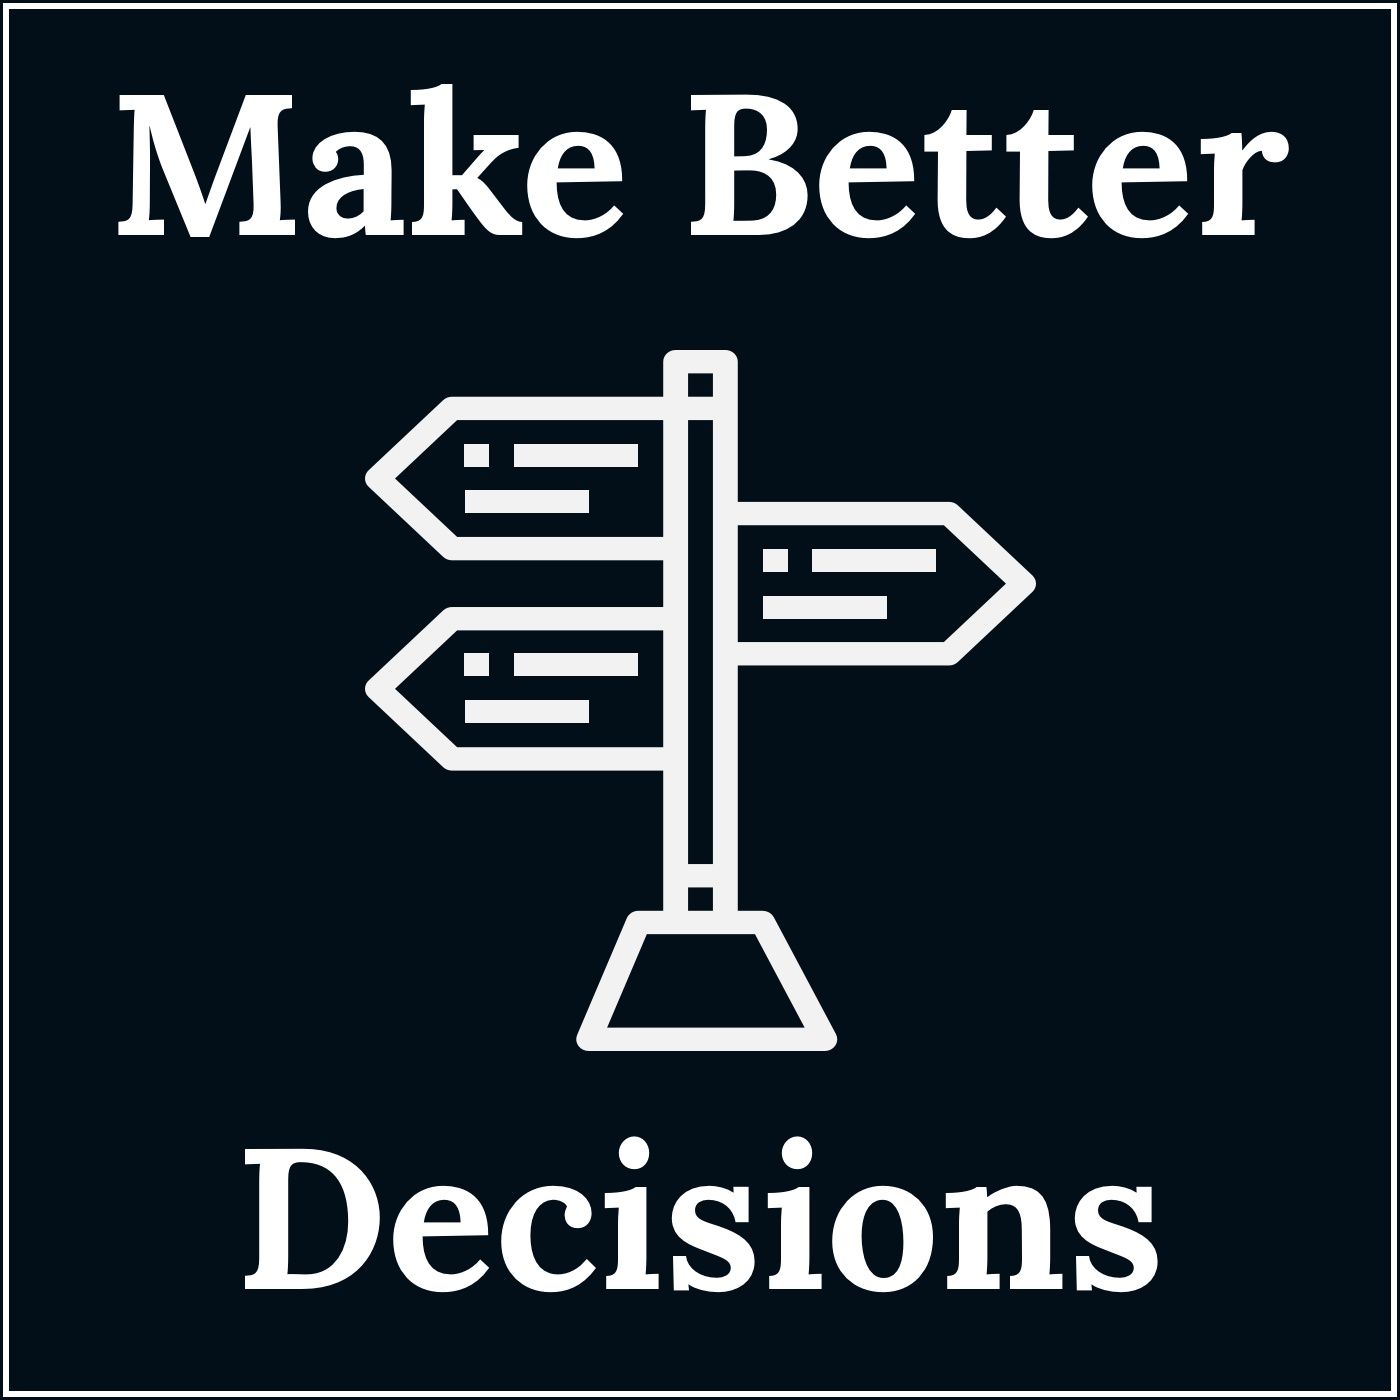 Make Better Product Decisions